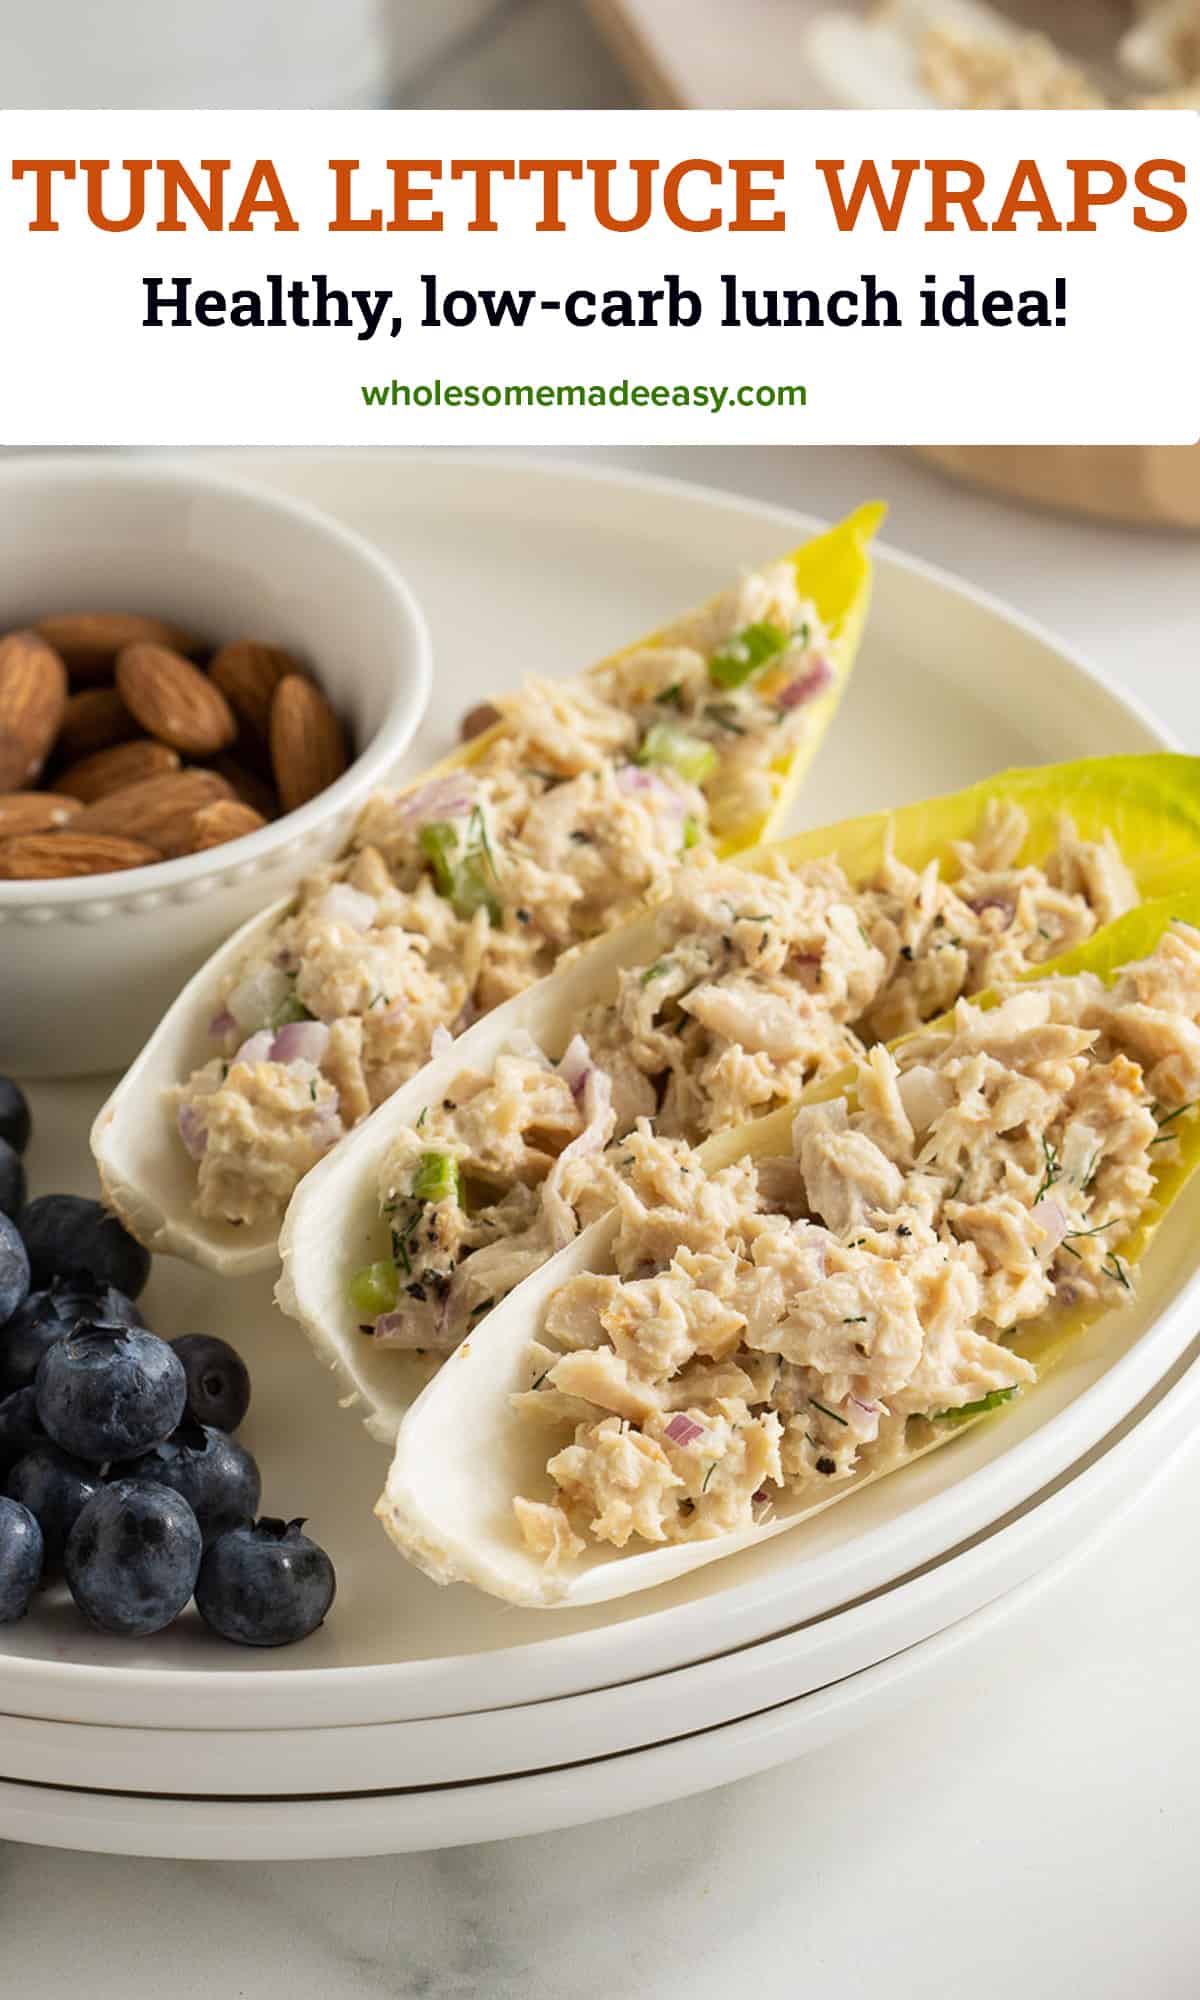 A side view of endive leaves stuffed with tuna salad to make tuna lettuce wraps on a white plate with blueberries and a small bowl of almonds.